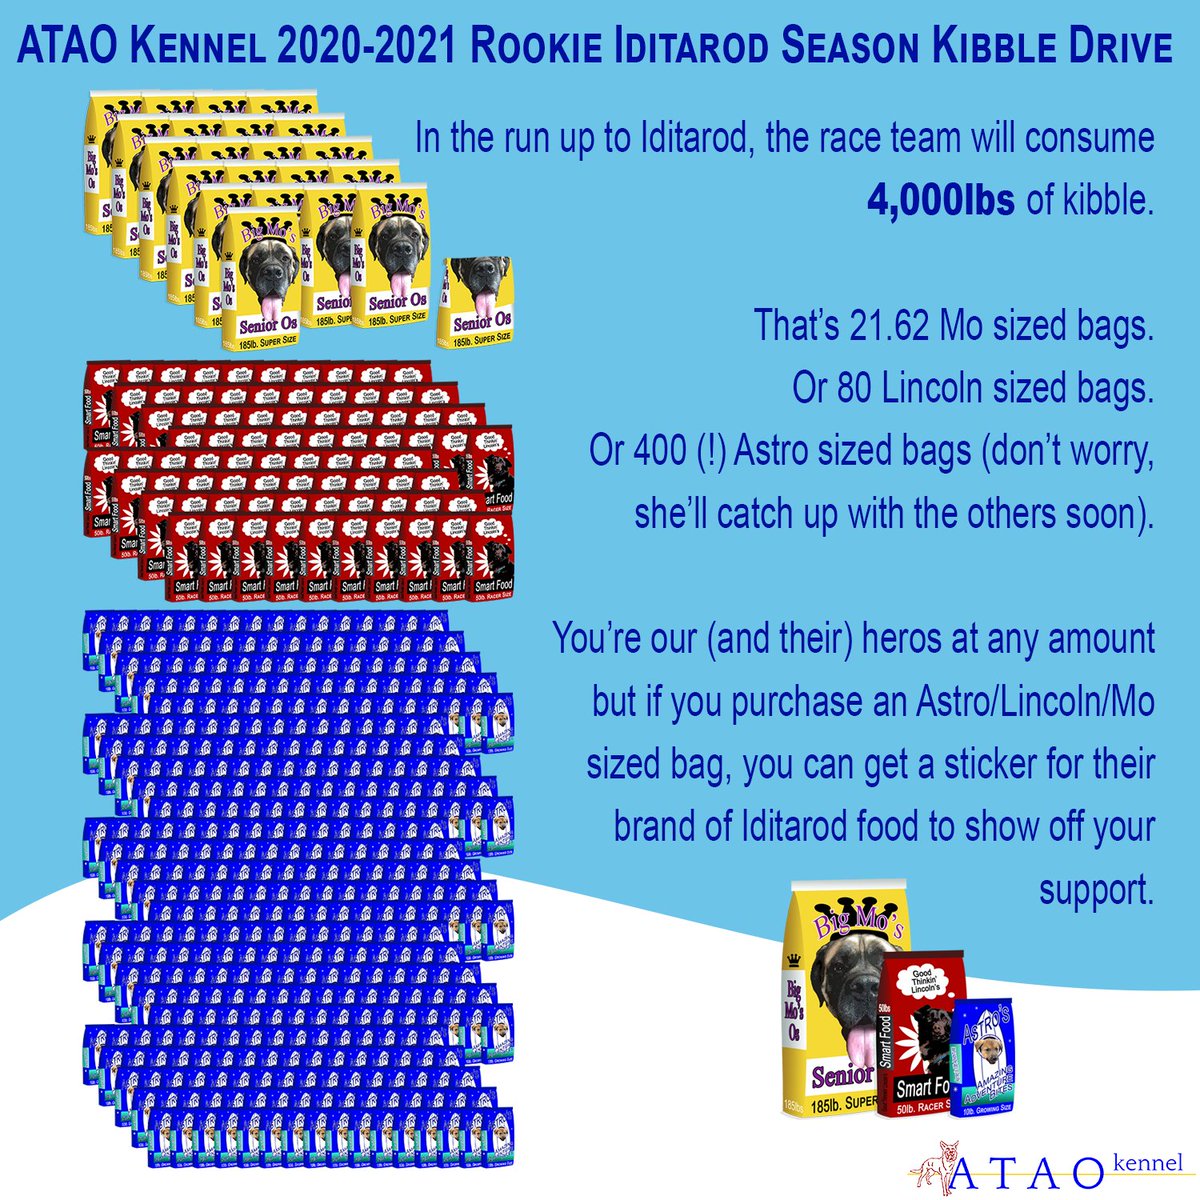 So... How many of each of these bags of dog food (commensurate in weight to the dogs who modeled for them!) would we need to reach our goal of... two tons? Take a look!